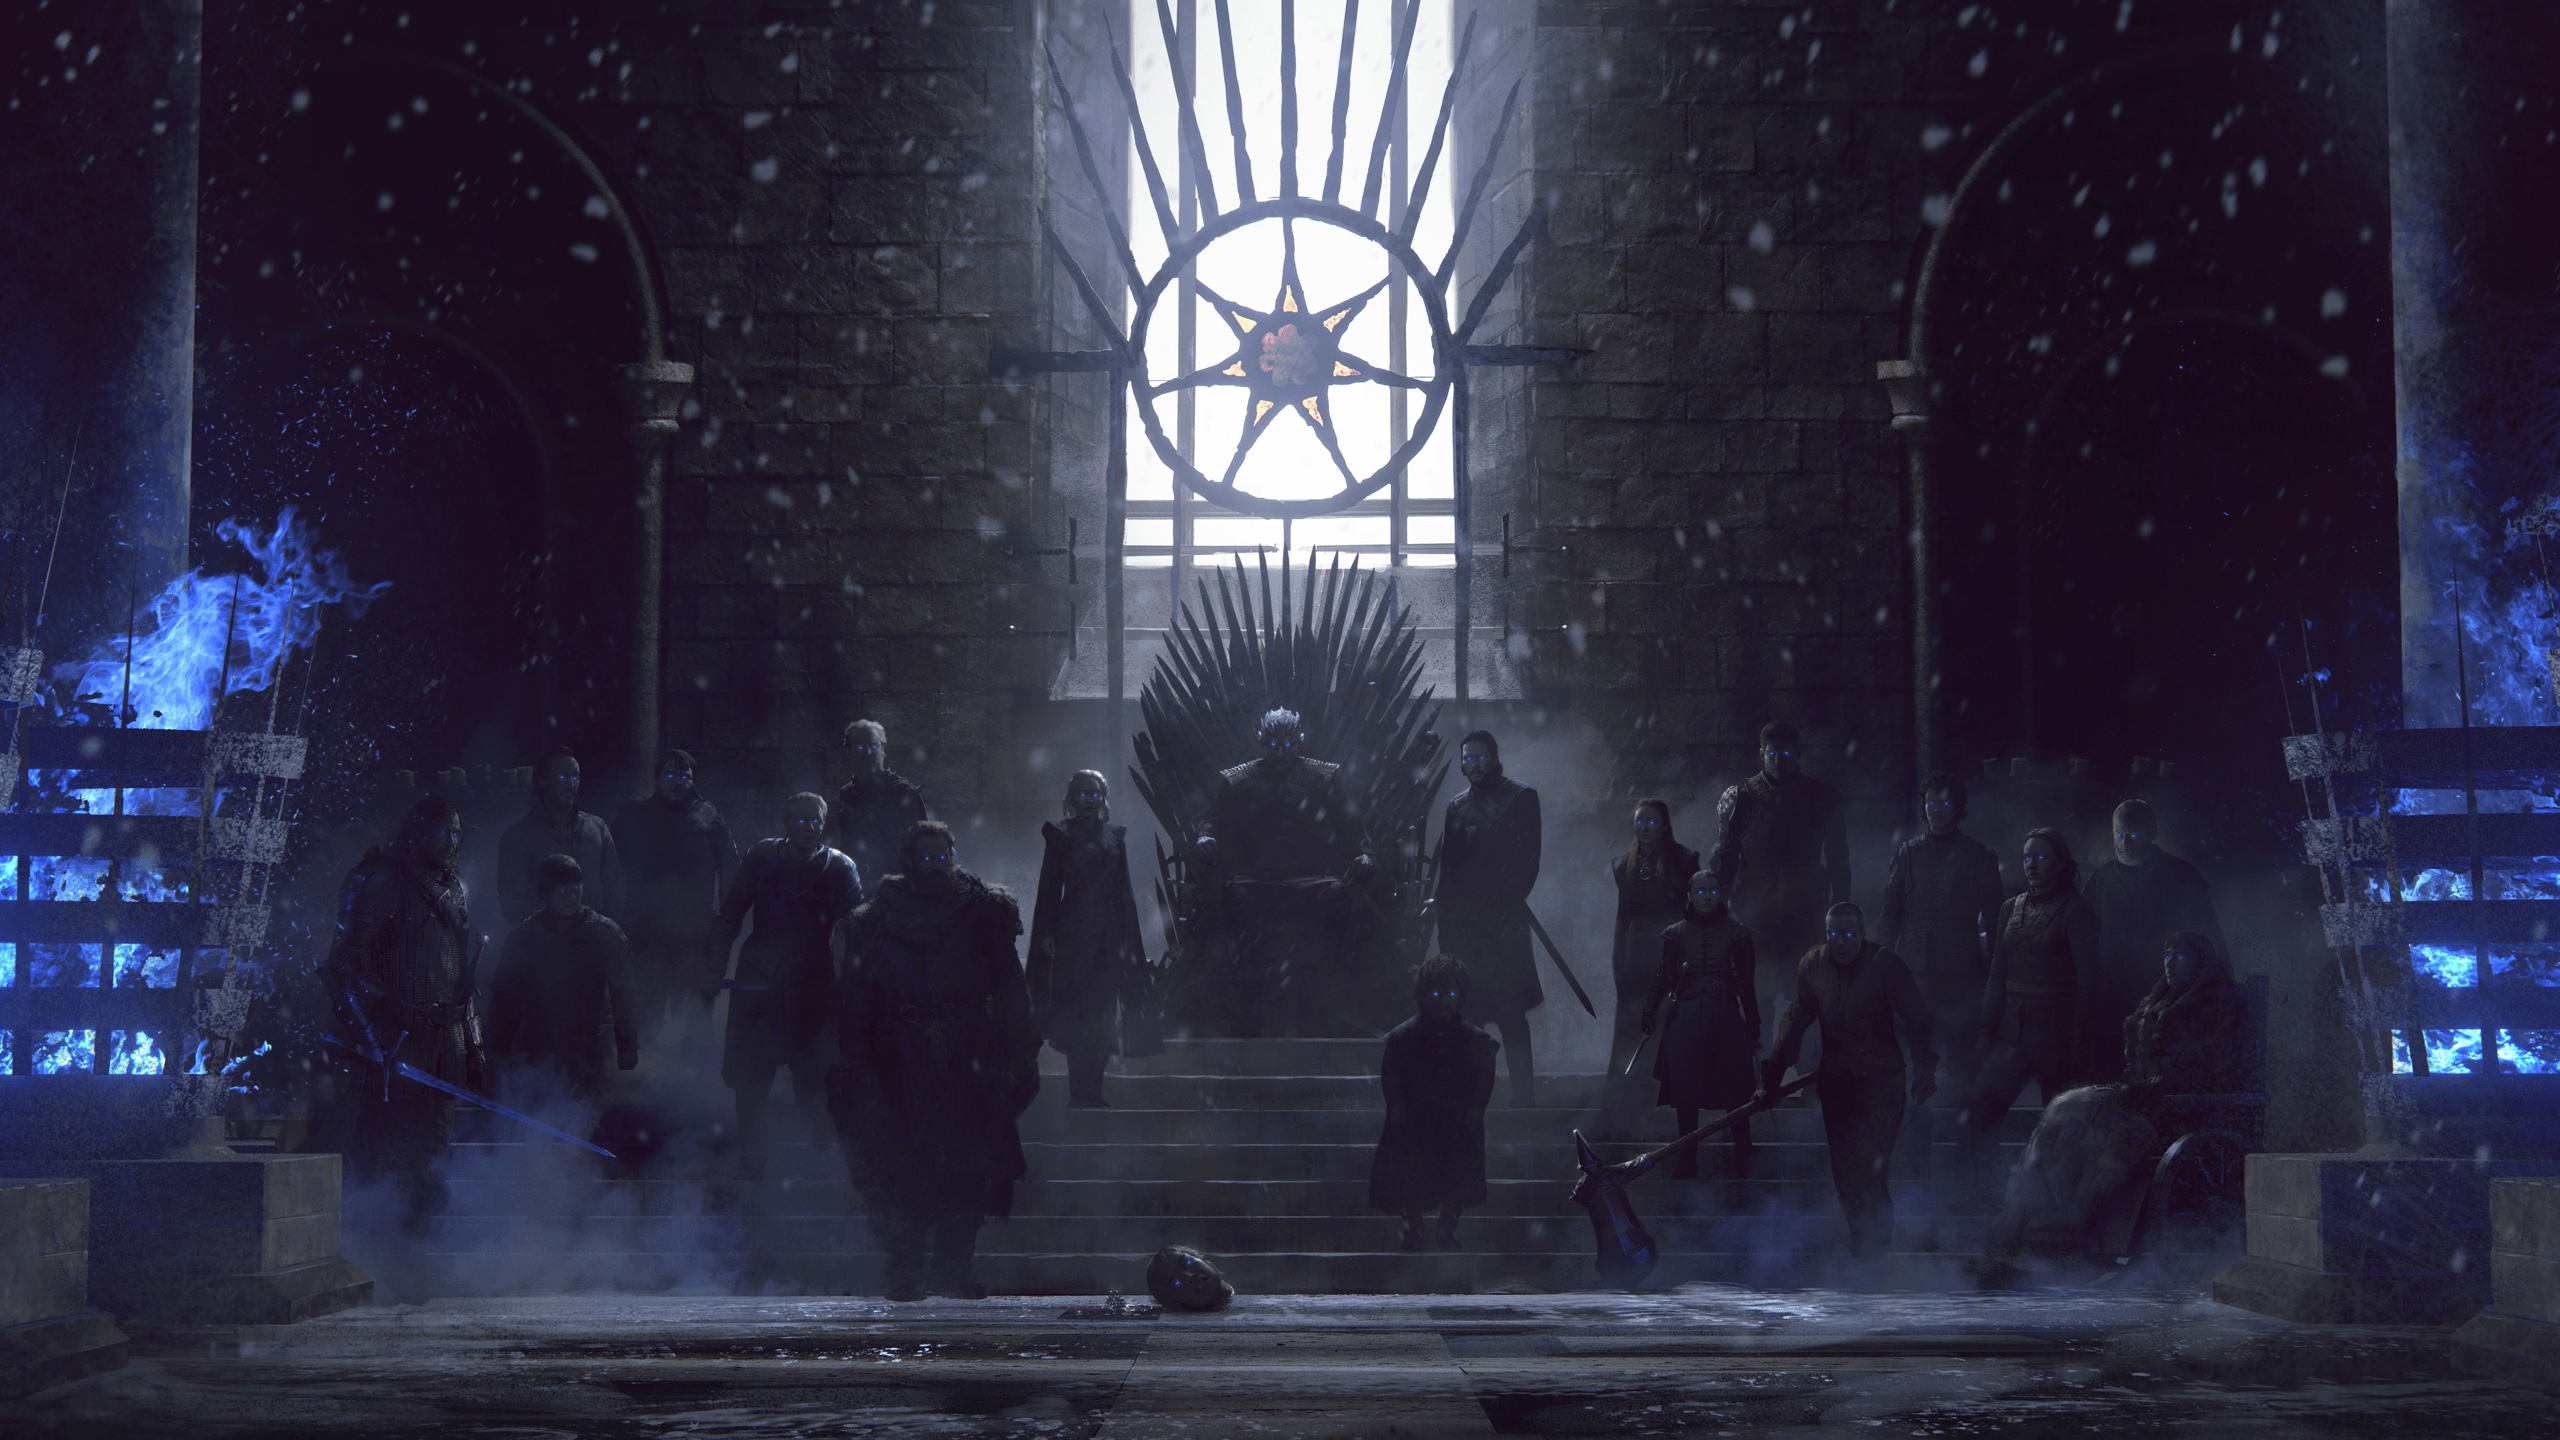 In the Hall of the Night King HD Wallpaper. Background